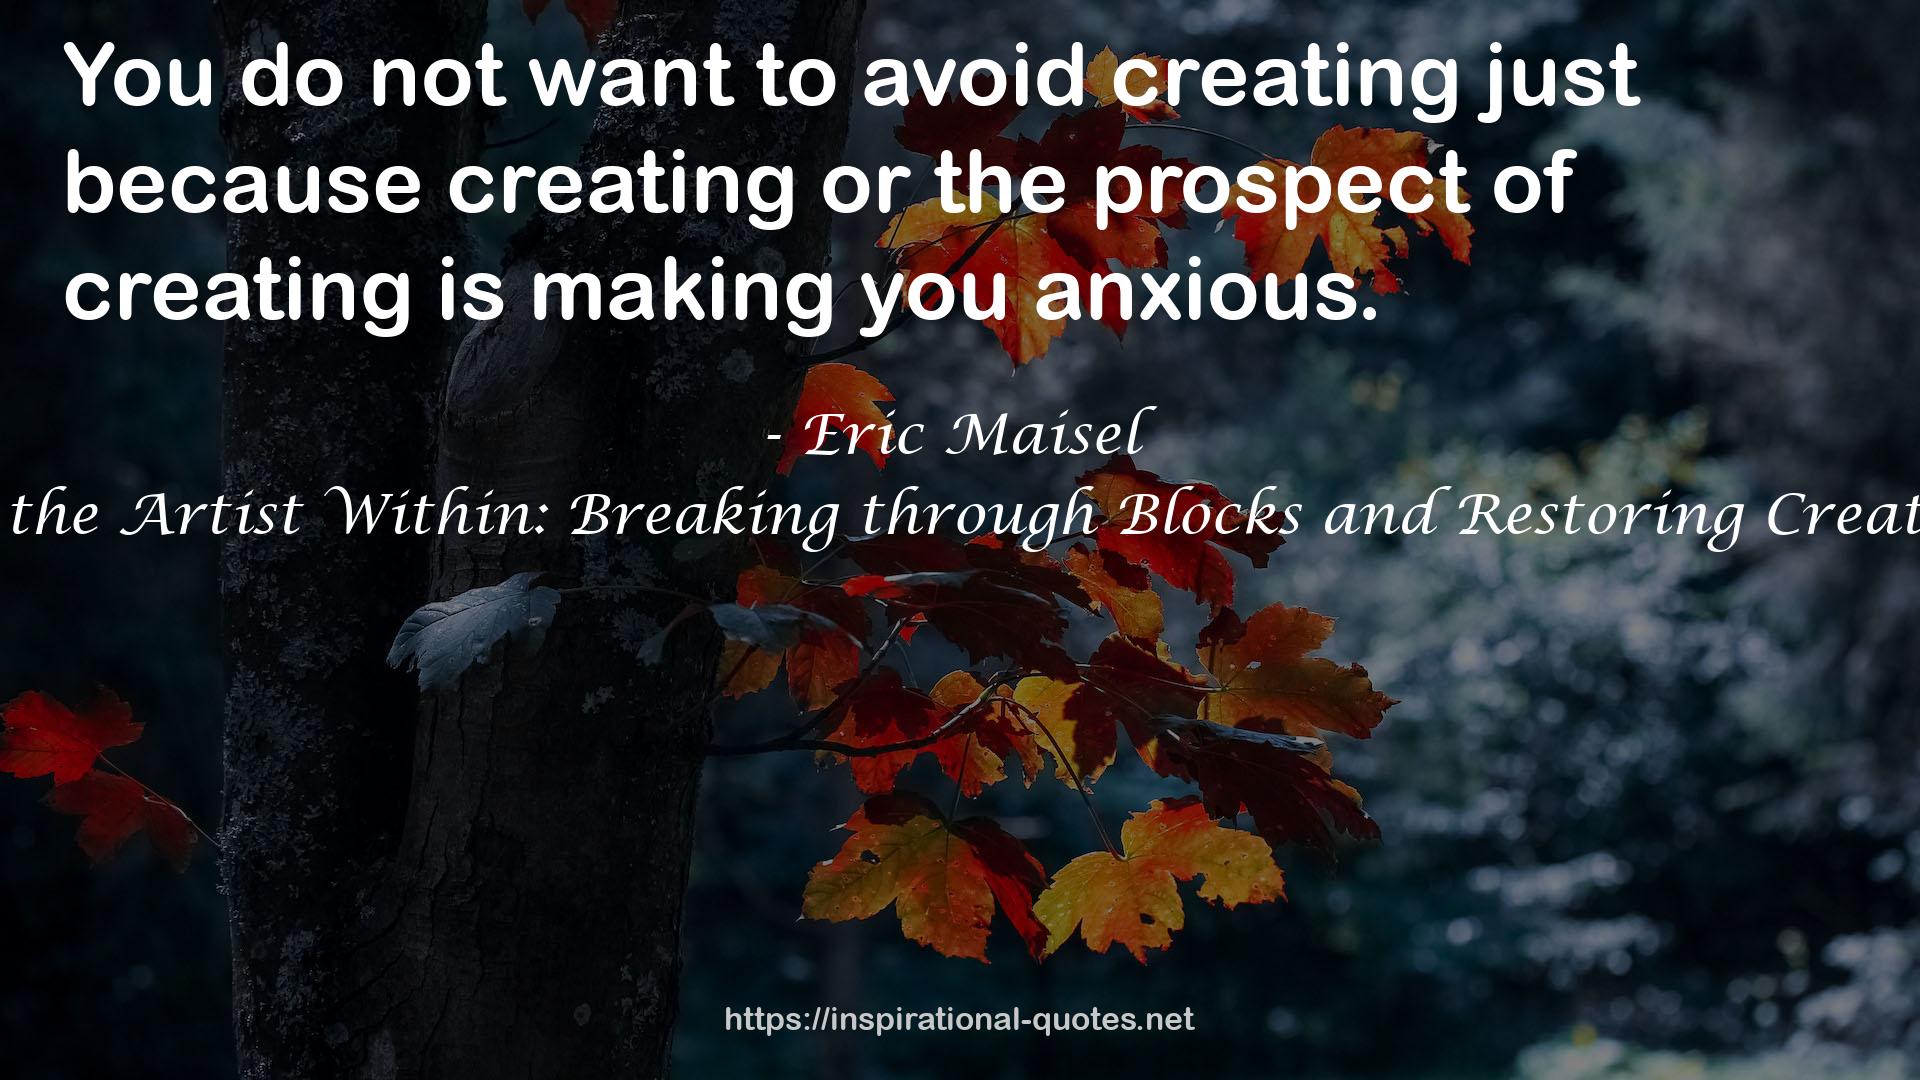 Unleashing the Artist Within: Breaking through Blocks and Restoring Creative Purpose QUOTES